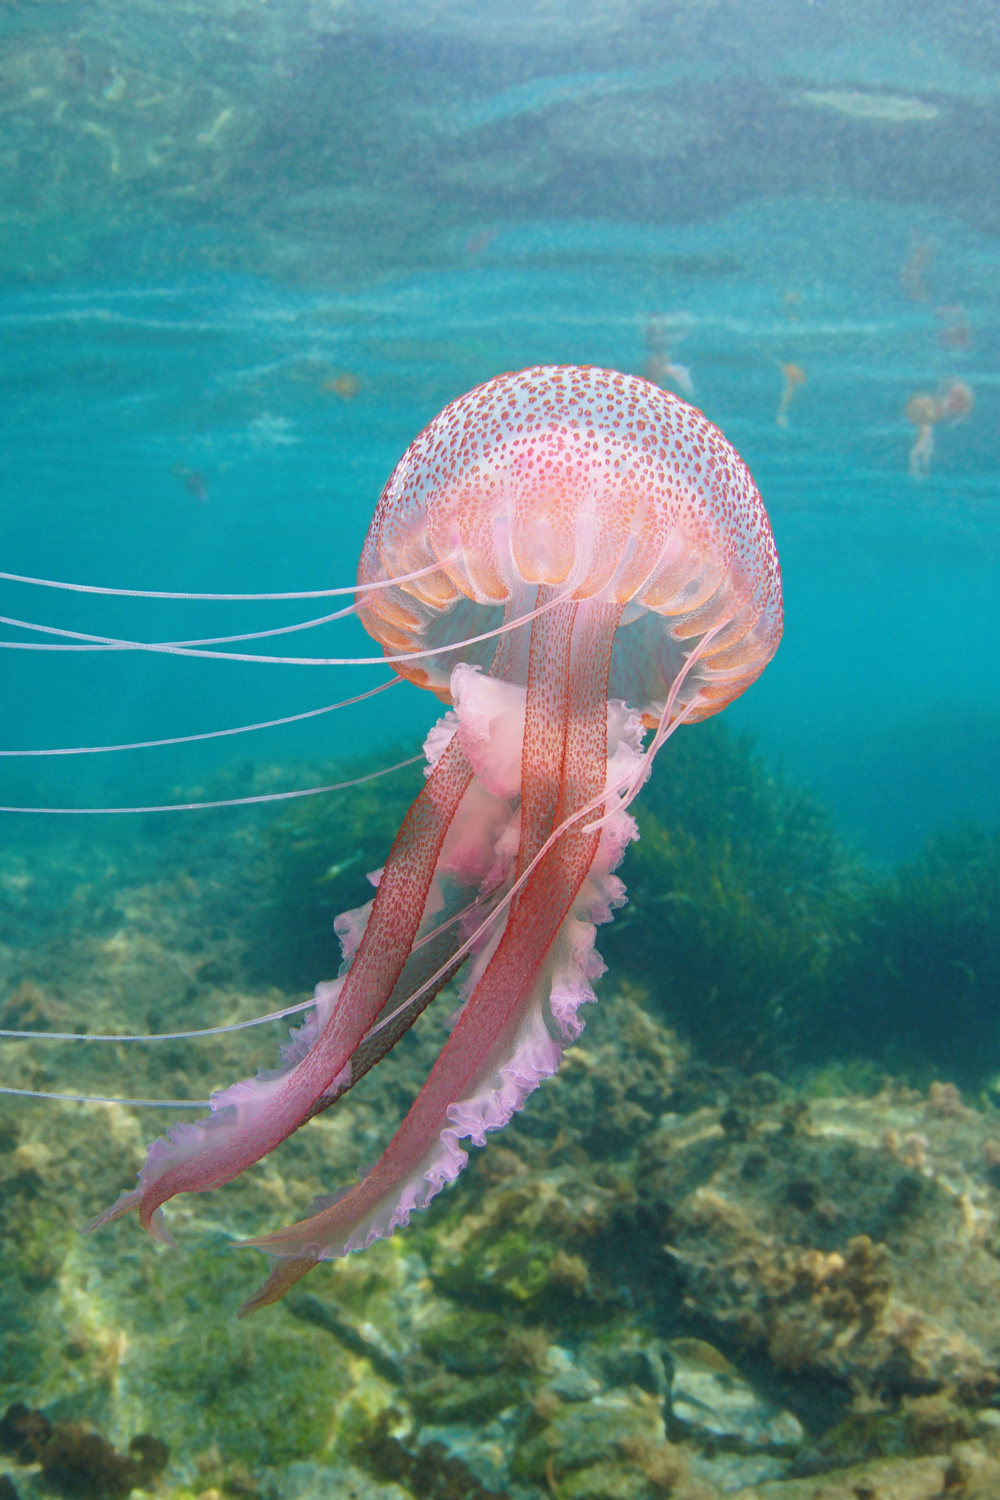 Tips to Feed Jellyfish